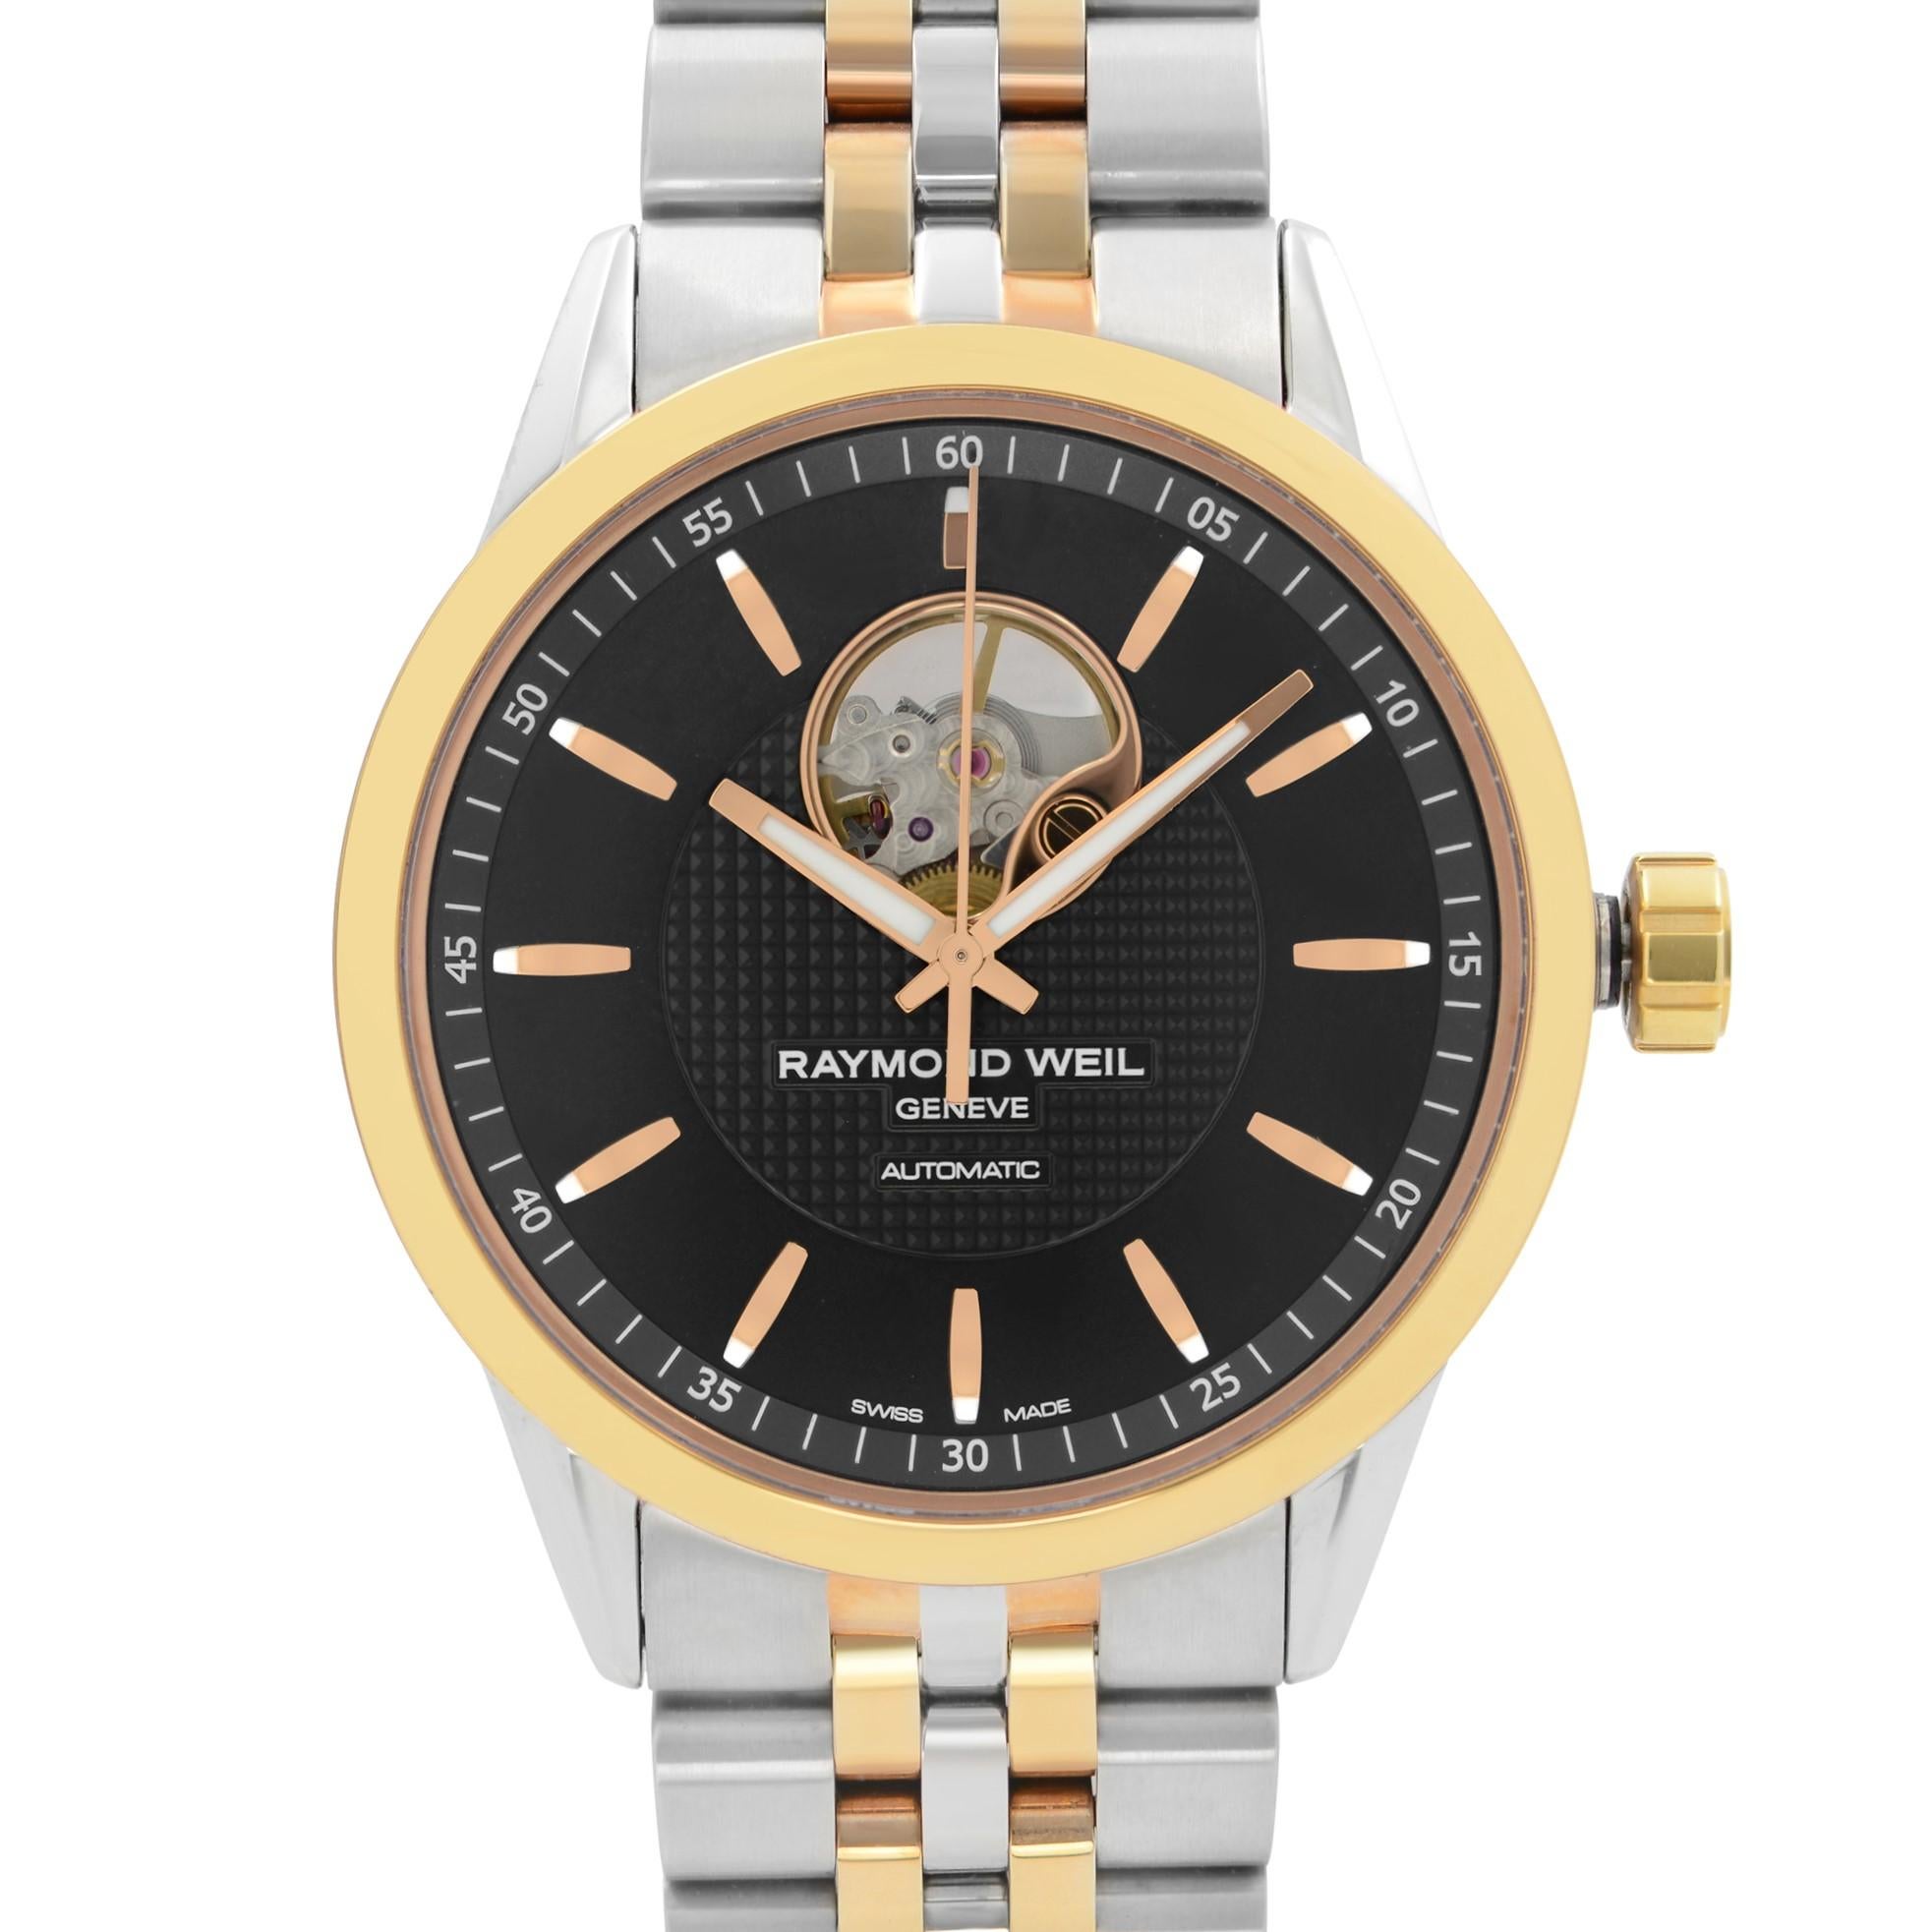 The watch has never been worn or used but may have micro marks due to store handling. Original box and papers are included. 

Details:
MSRP 2395
Brand RAYMOND WEIL
Department Men
Model Number 2710-SP5-20021
Country/Region of Manufacture